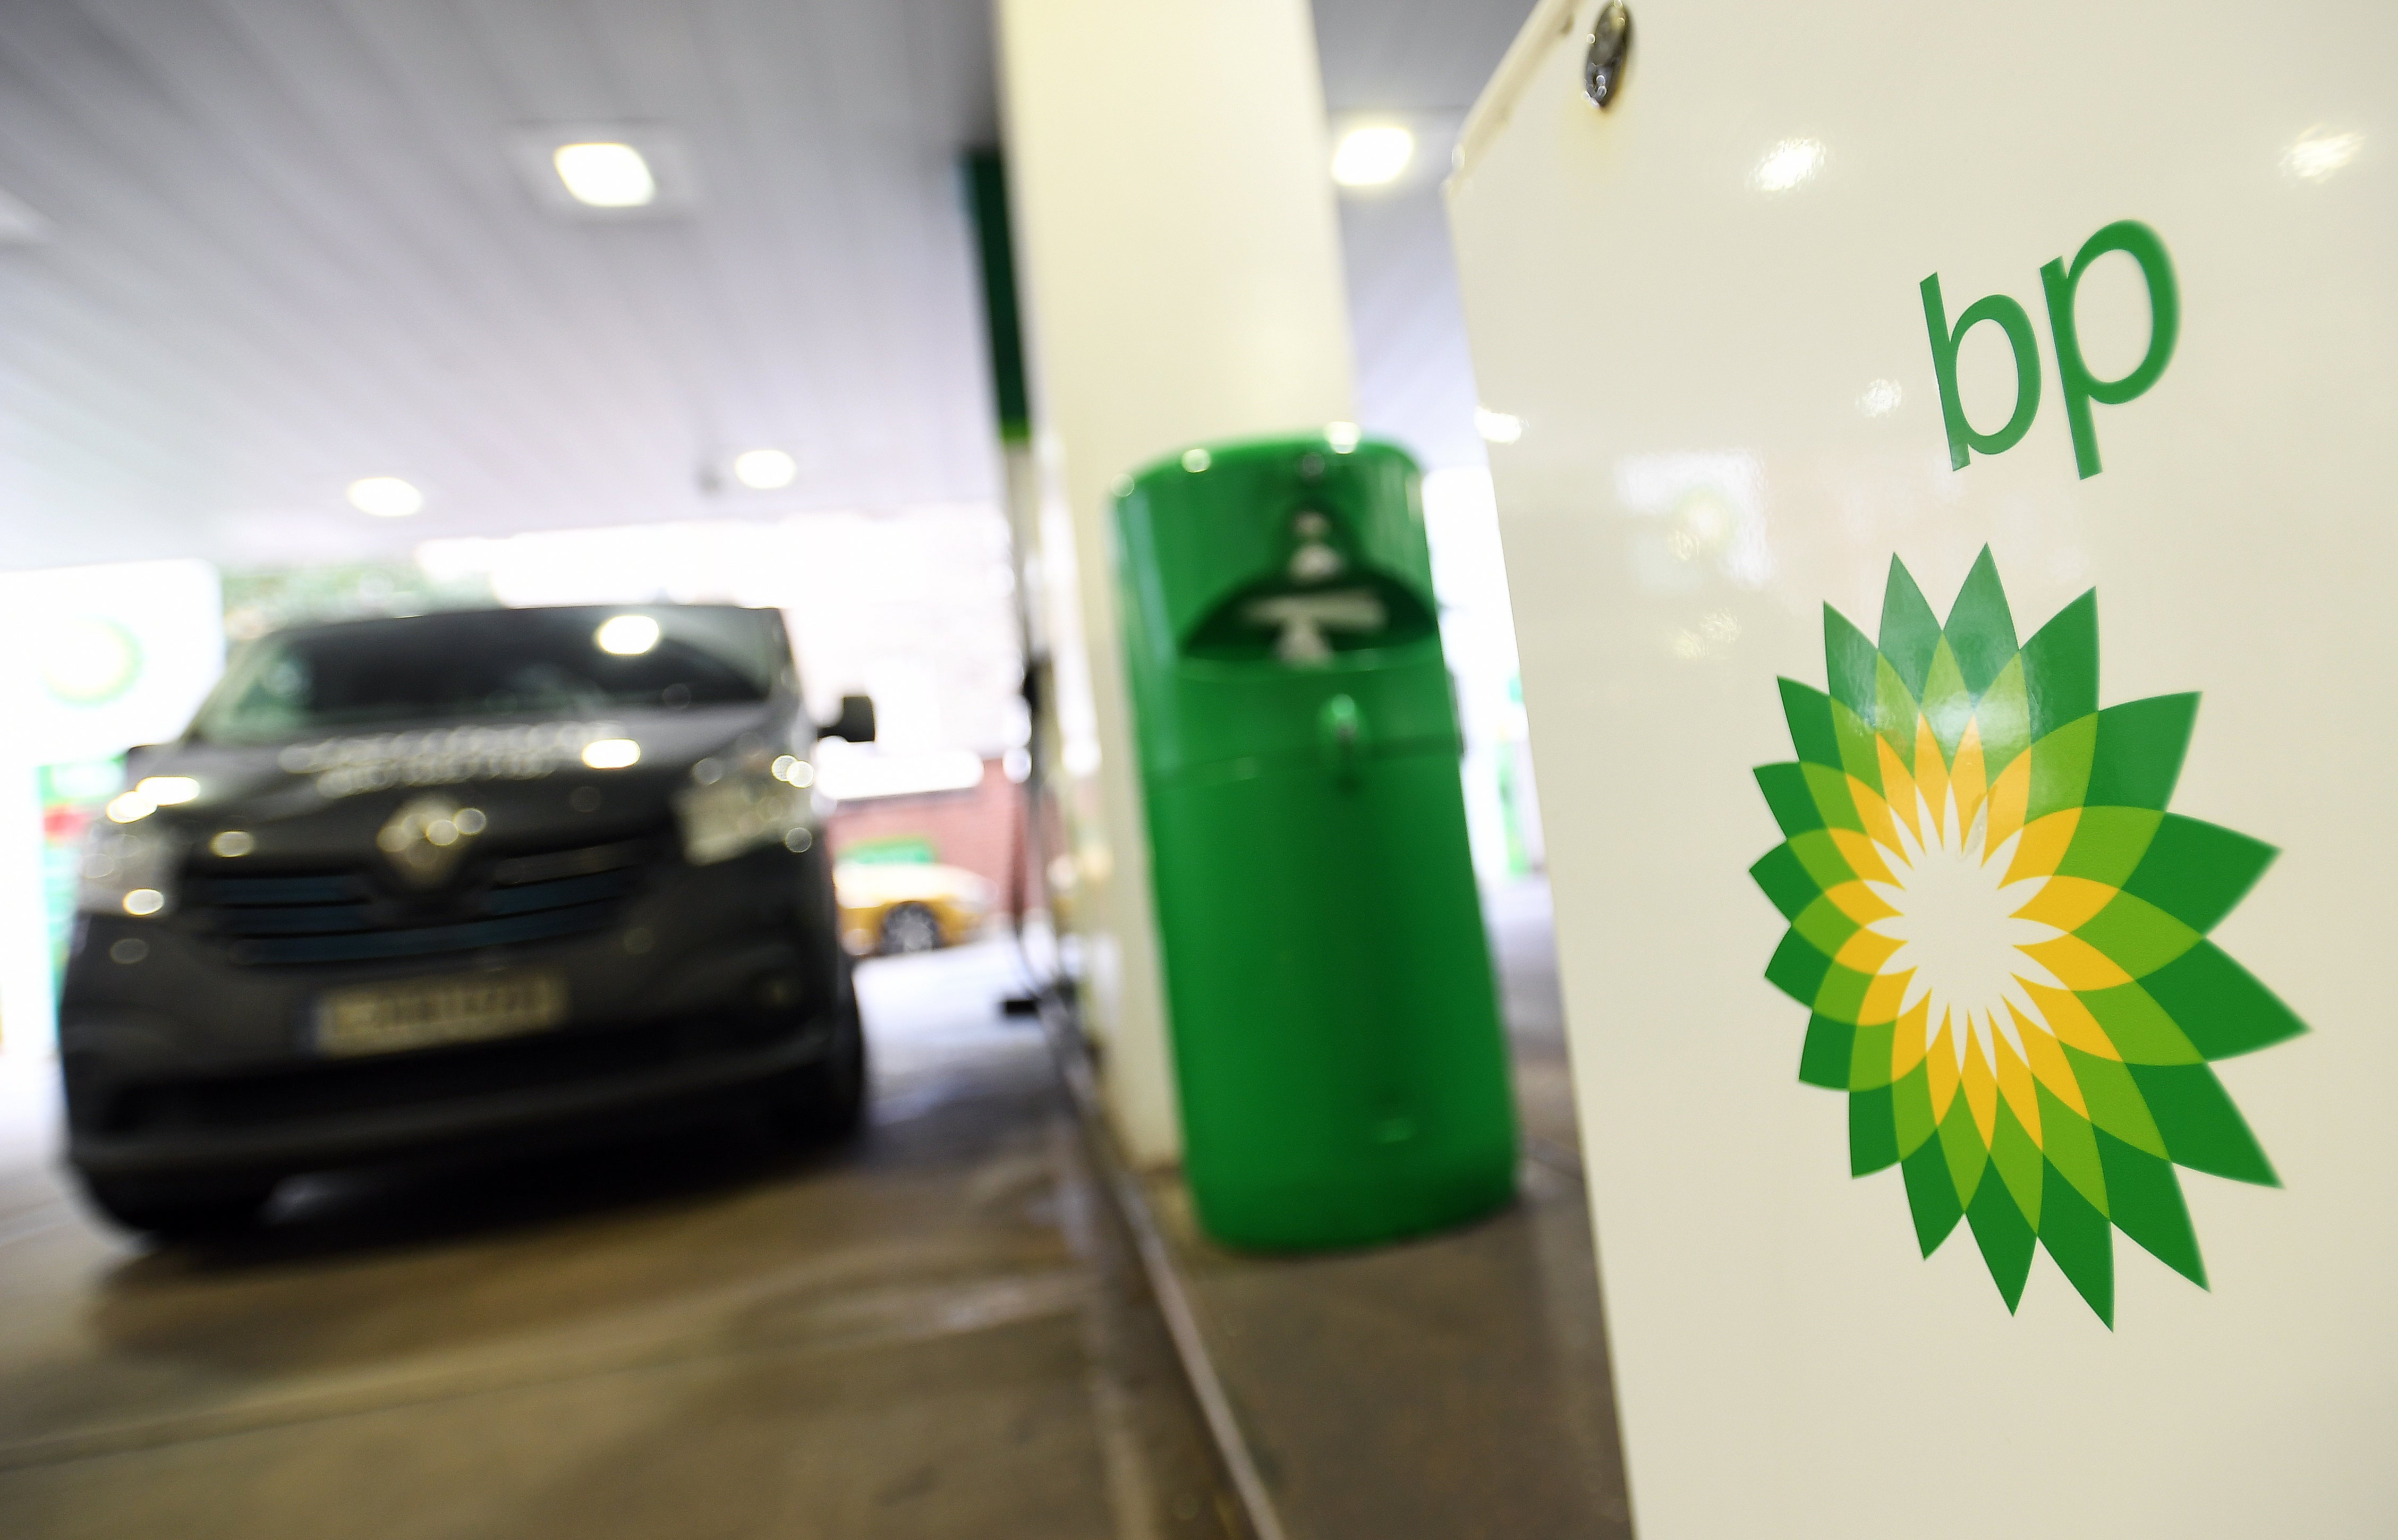 BP joined the likes of Shell and Centrica in announcing record profits